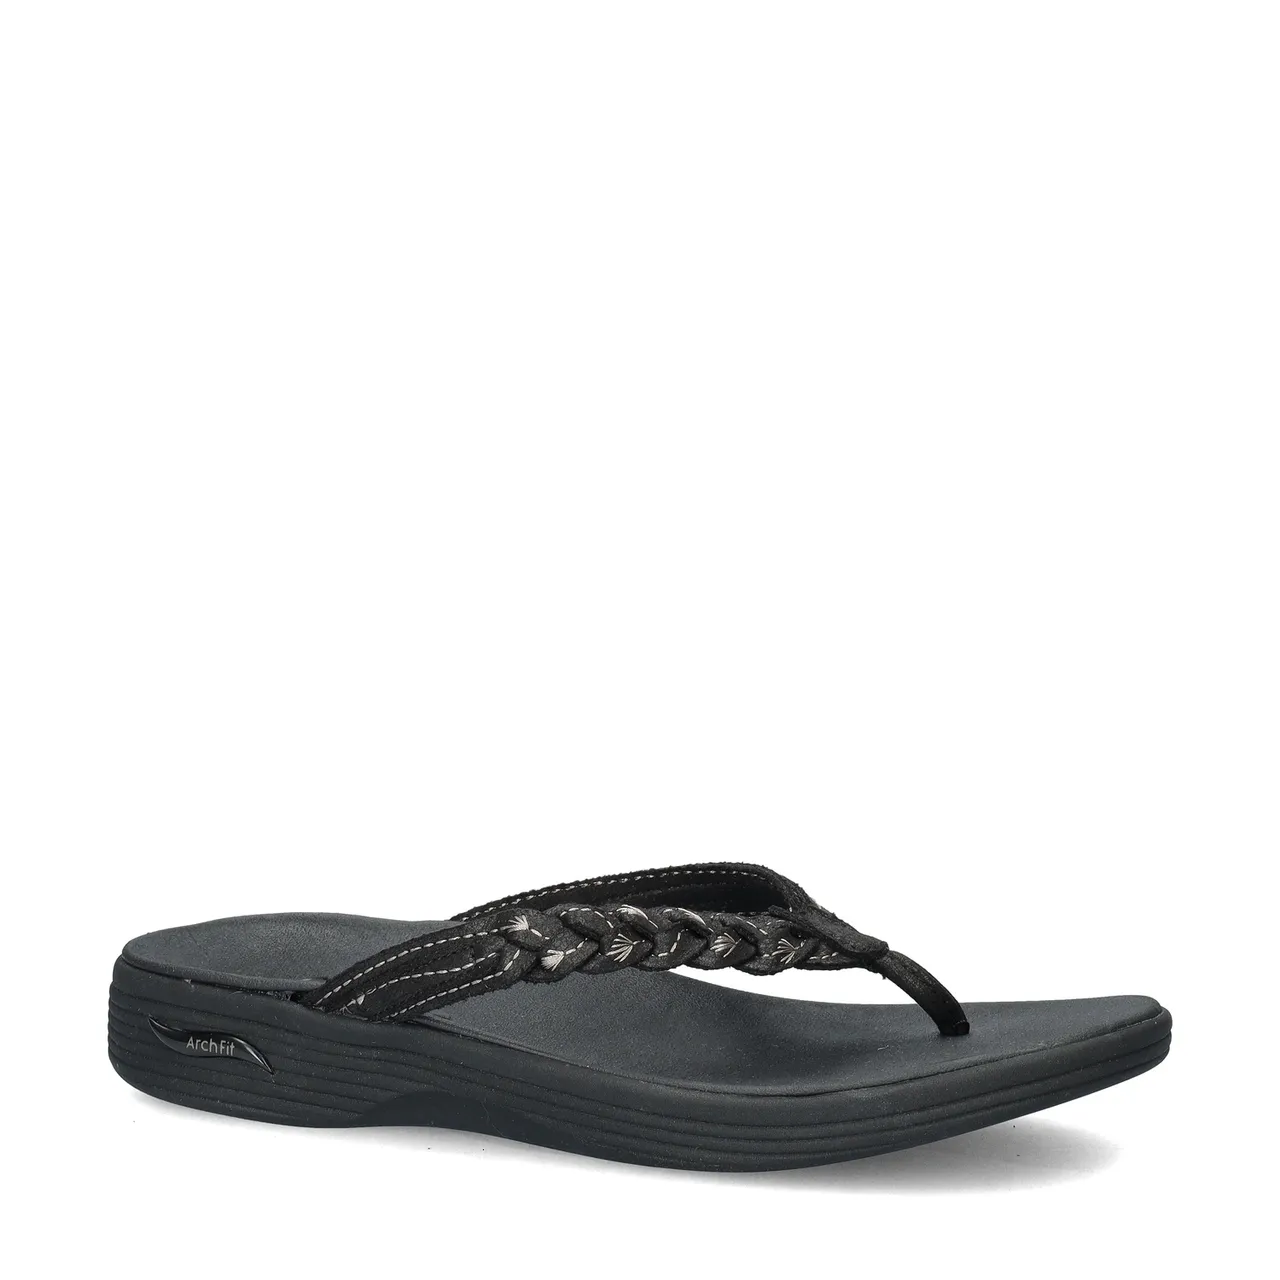 Skechers Arch Fit Maui slippers